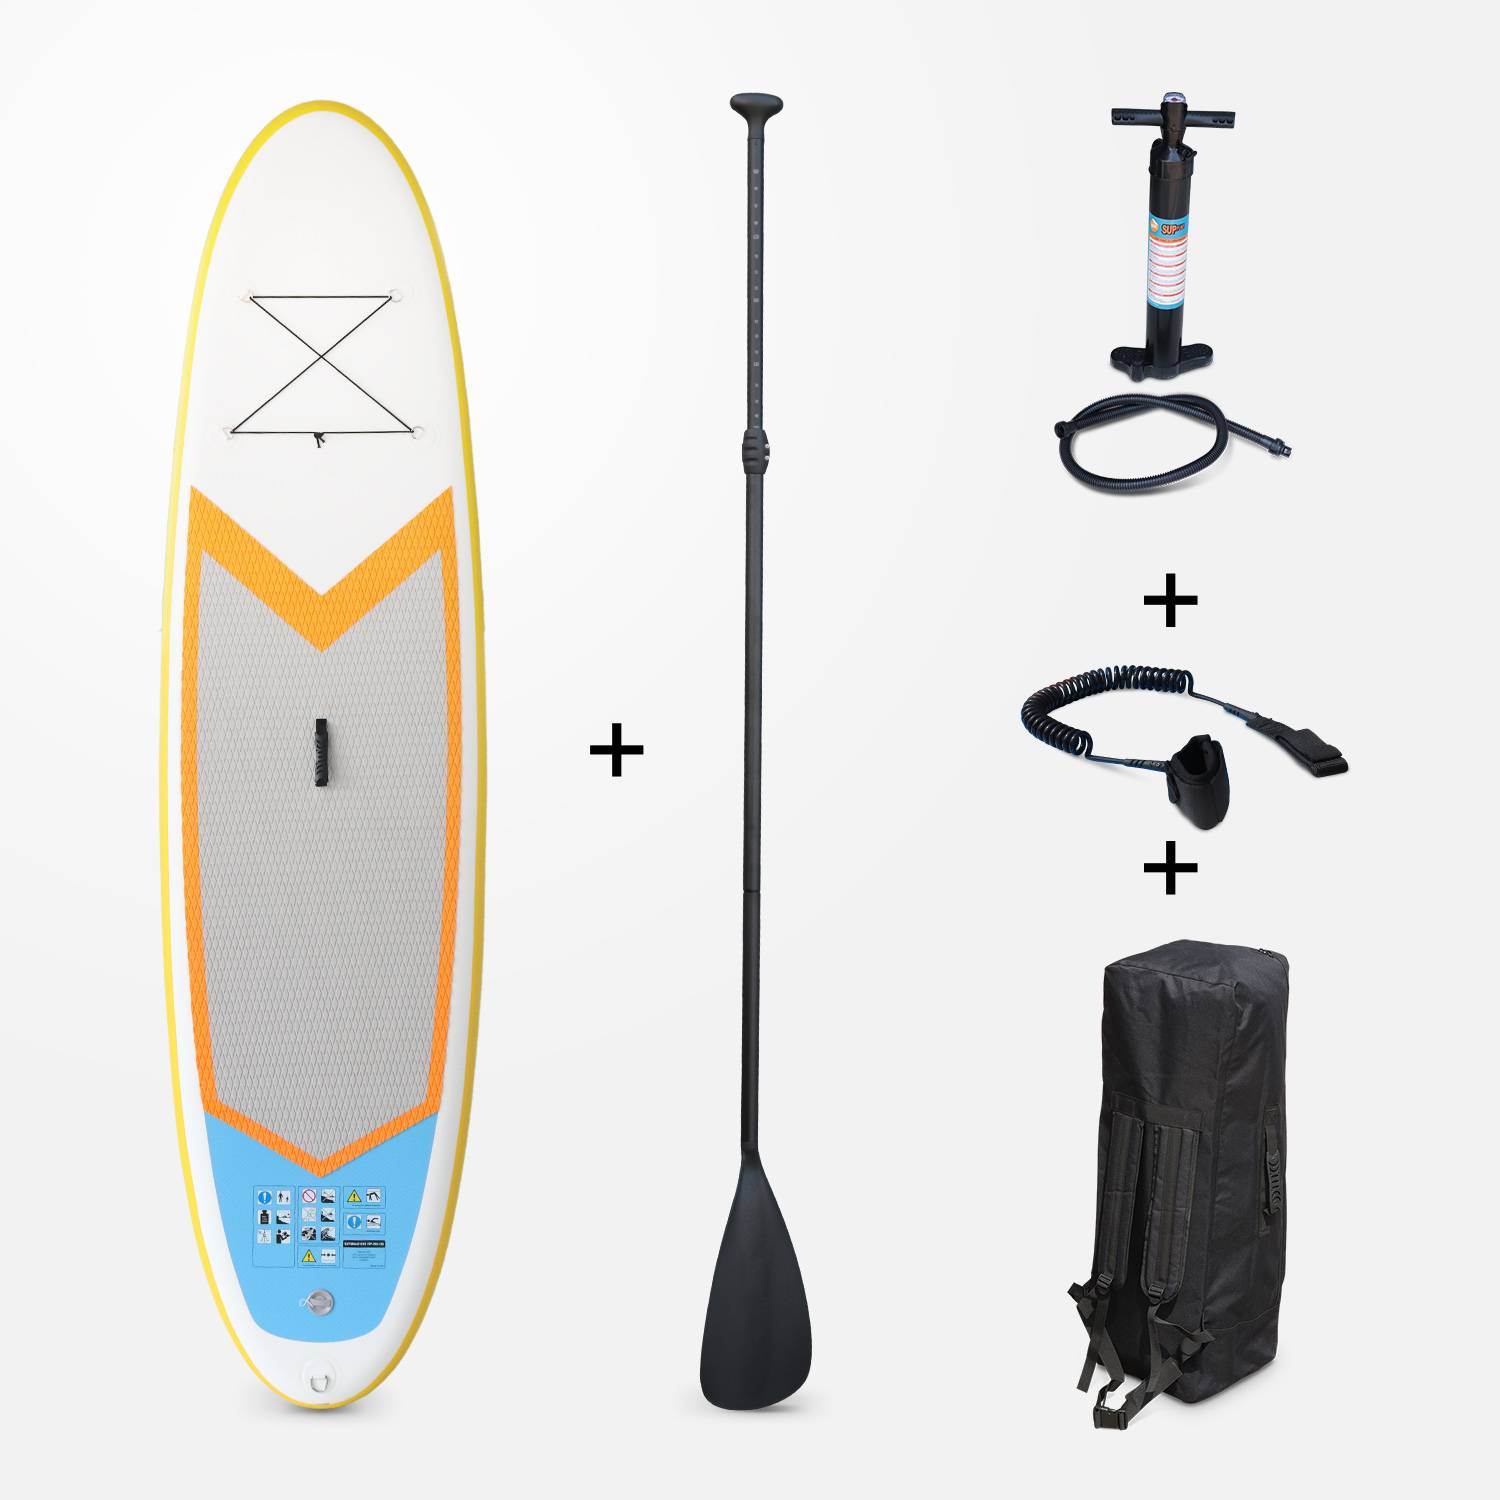 9.84FT Inflatable Stand Up Paddle Board - SUP kit with double-action high-pressure pump, paddle, leash and carry bag - Nico - Yellow,sweeek,Photo1